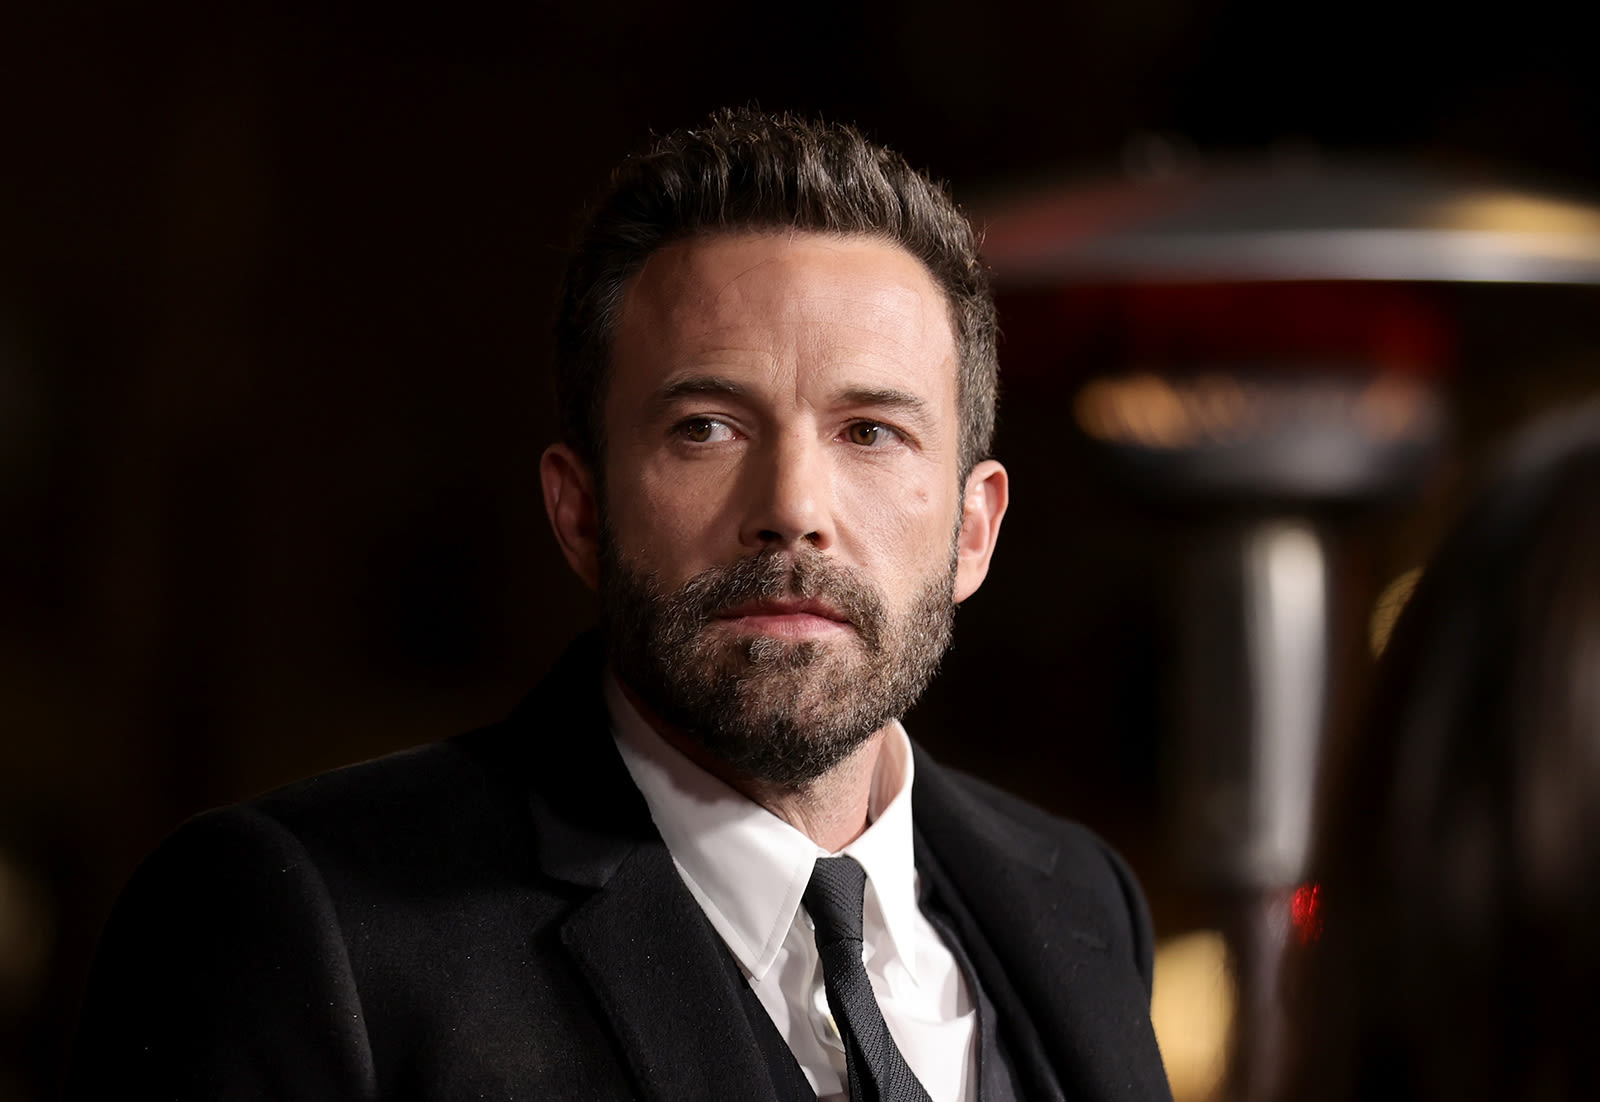 Ben Affleck ‘hopeful’ after closing on new home on J.Lo’s birthday